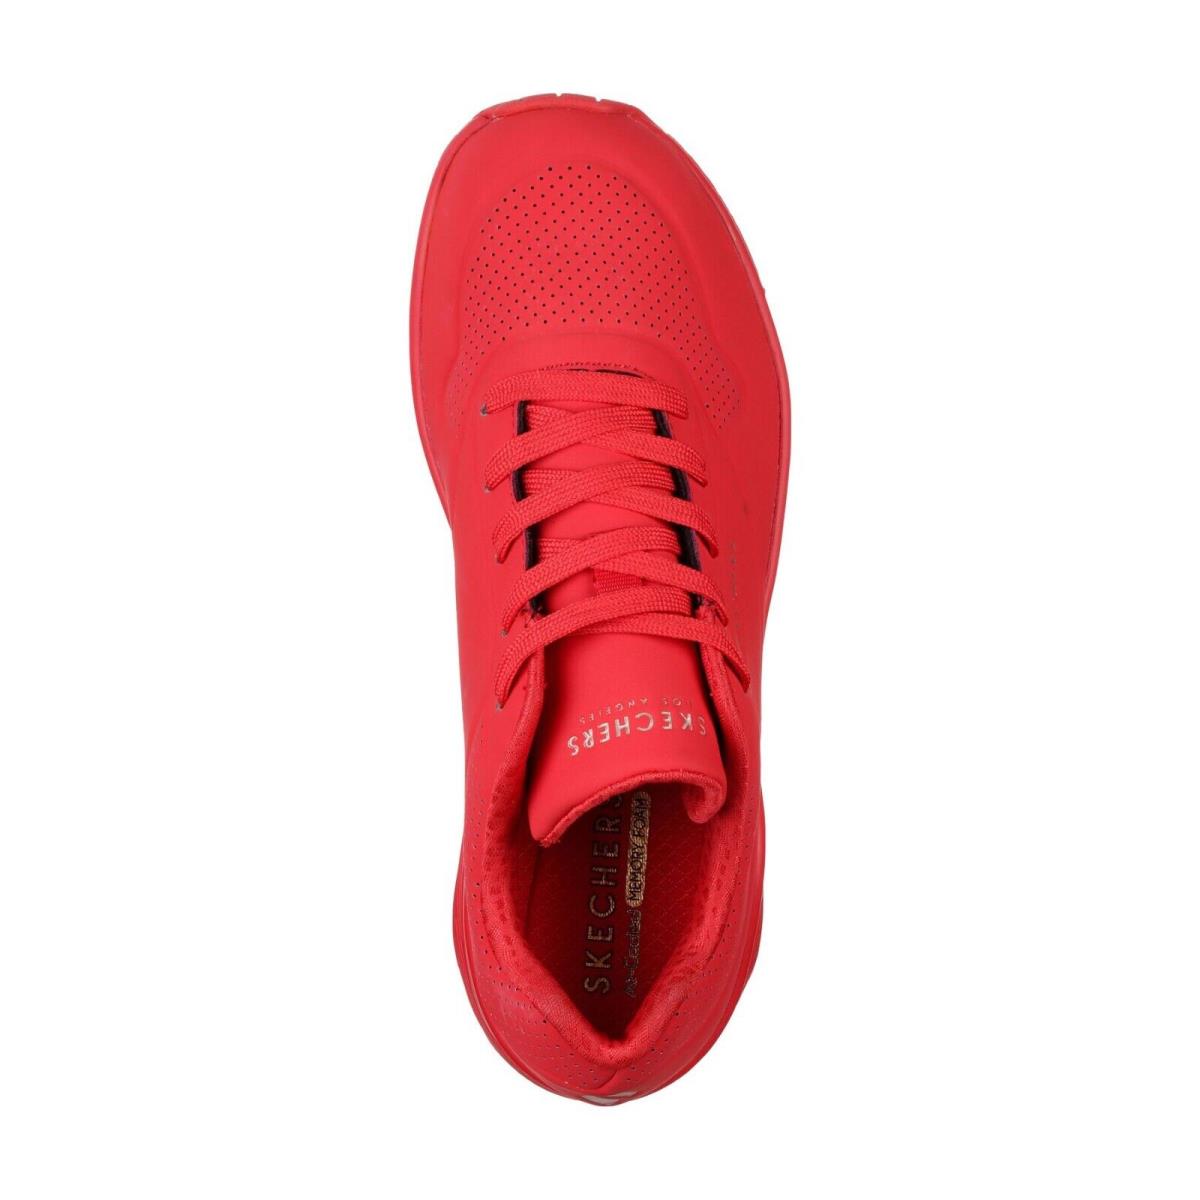 Skechers shoes  - Red 7